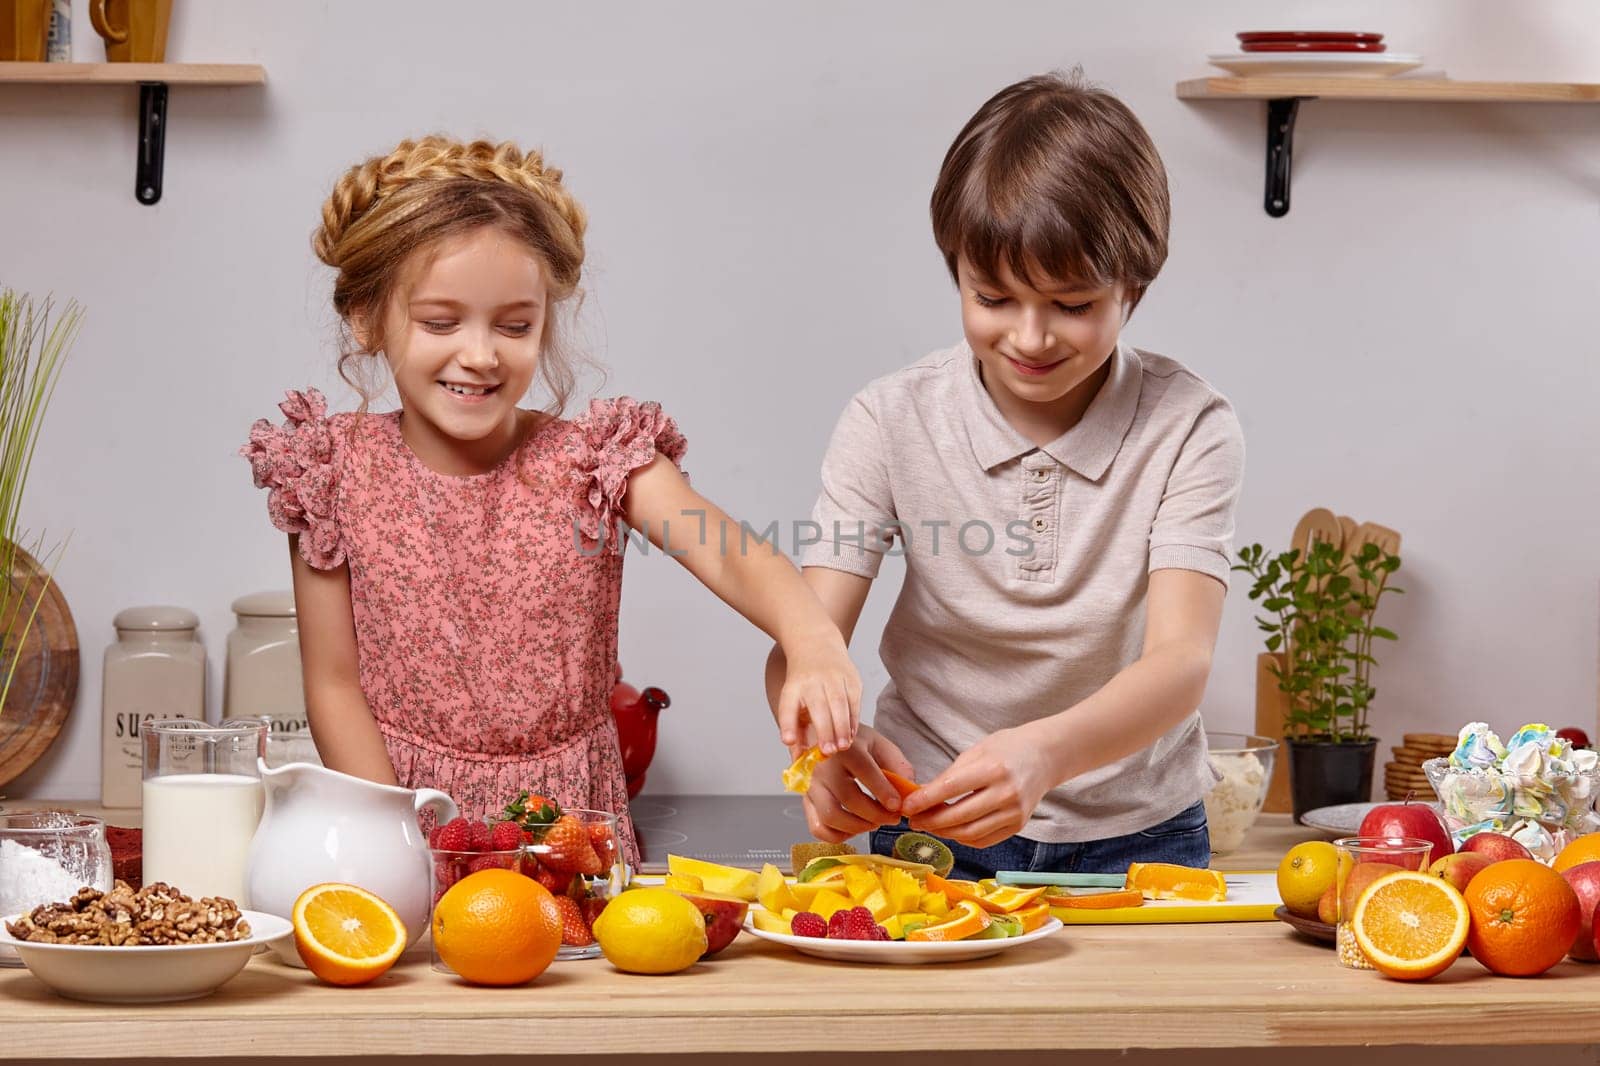 Cute cook couple. Pretty boy with brown hair dressed in a light t-shirt and jeans with a charming little girl dressed in a pink dress with a braid in her hairstyle are at a kitchen against a white wall with shelves on it. They are smiling and putting some orange on a plate together.